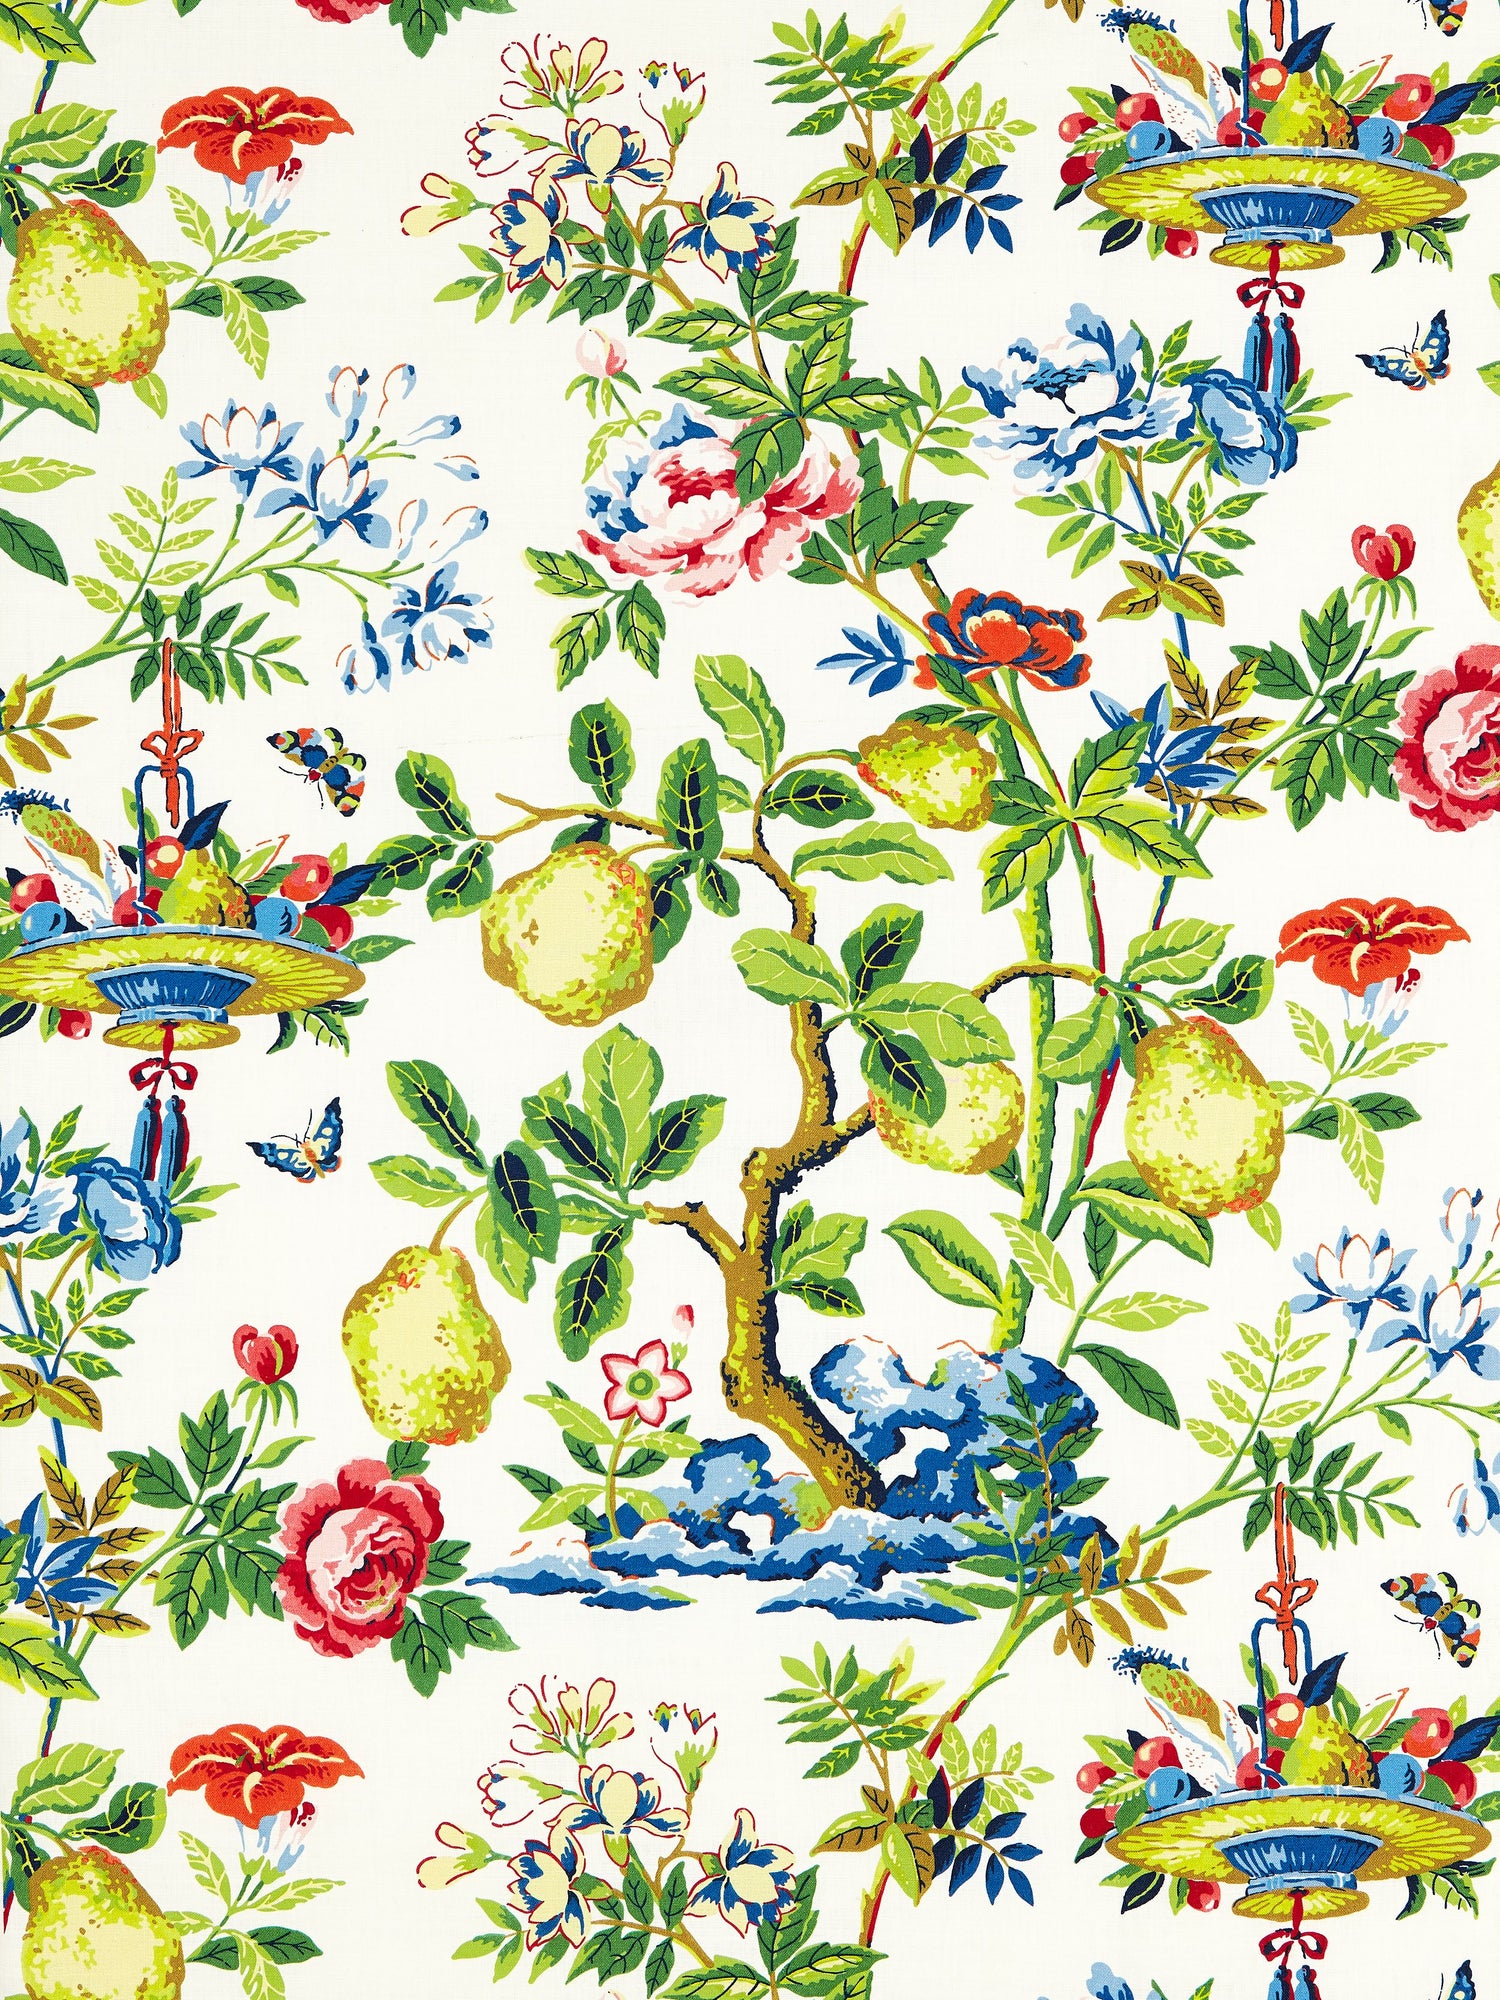 Shantung Garden Cotton Print fabric in bloom color - pattern number SC 000116583 - by Scalamandre in the Scalamandre Fabrics Book 1 collection